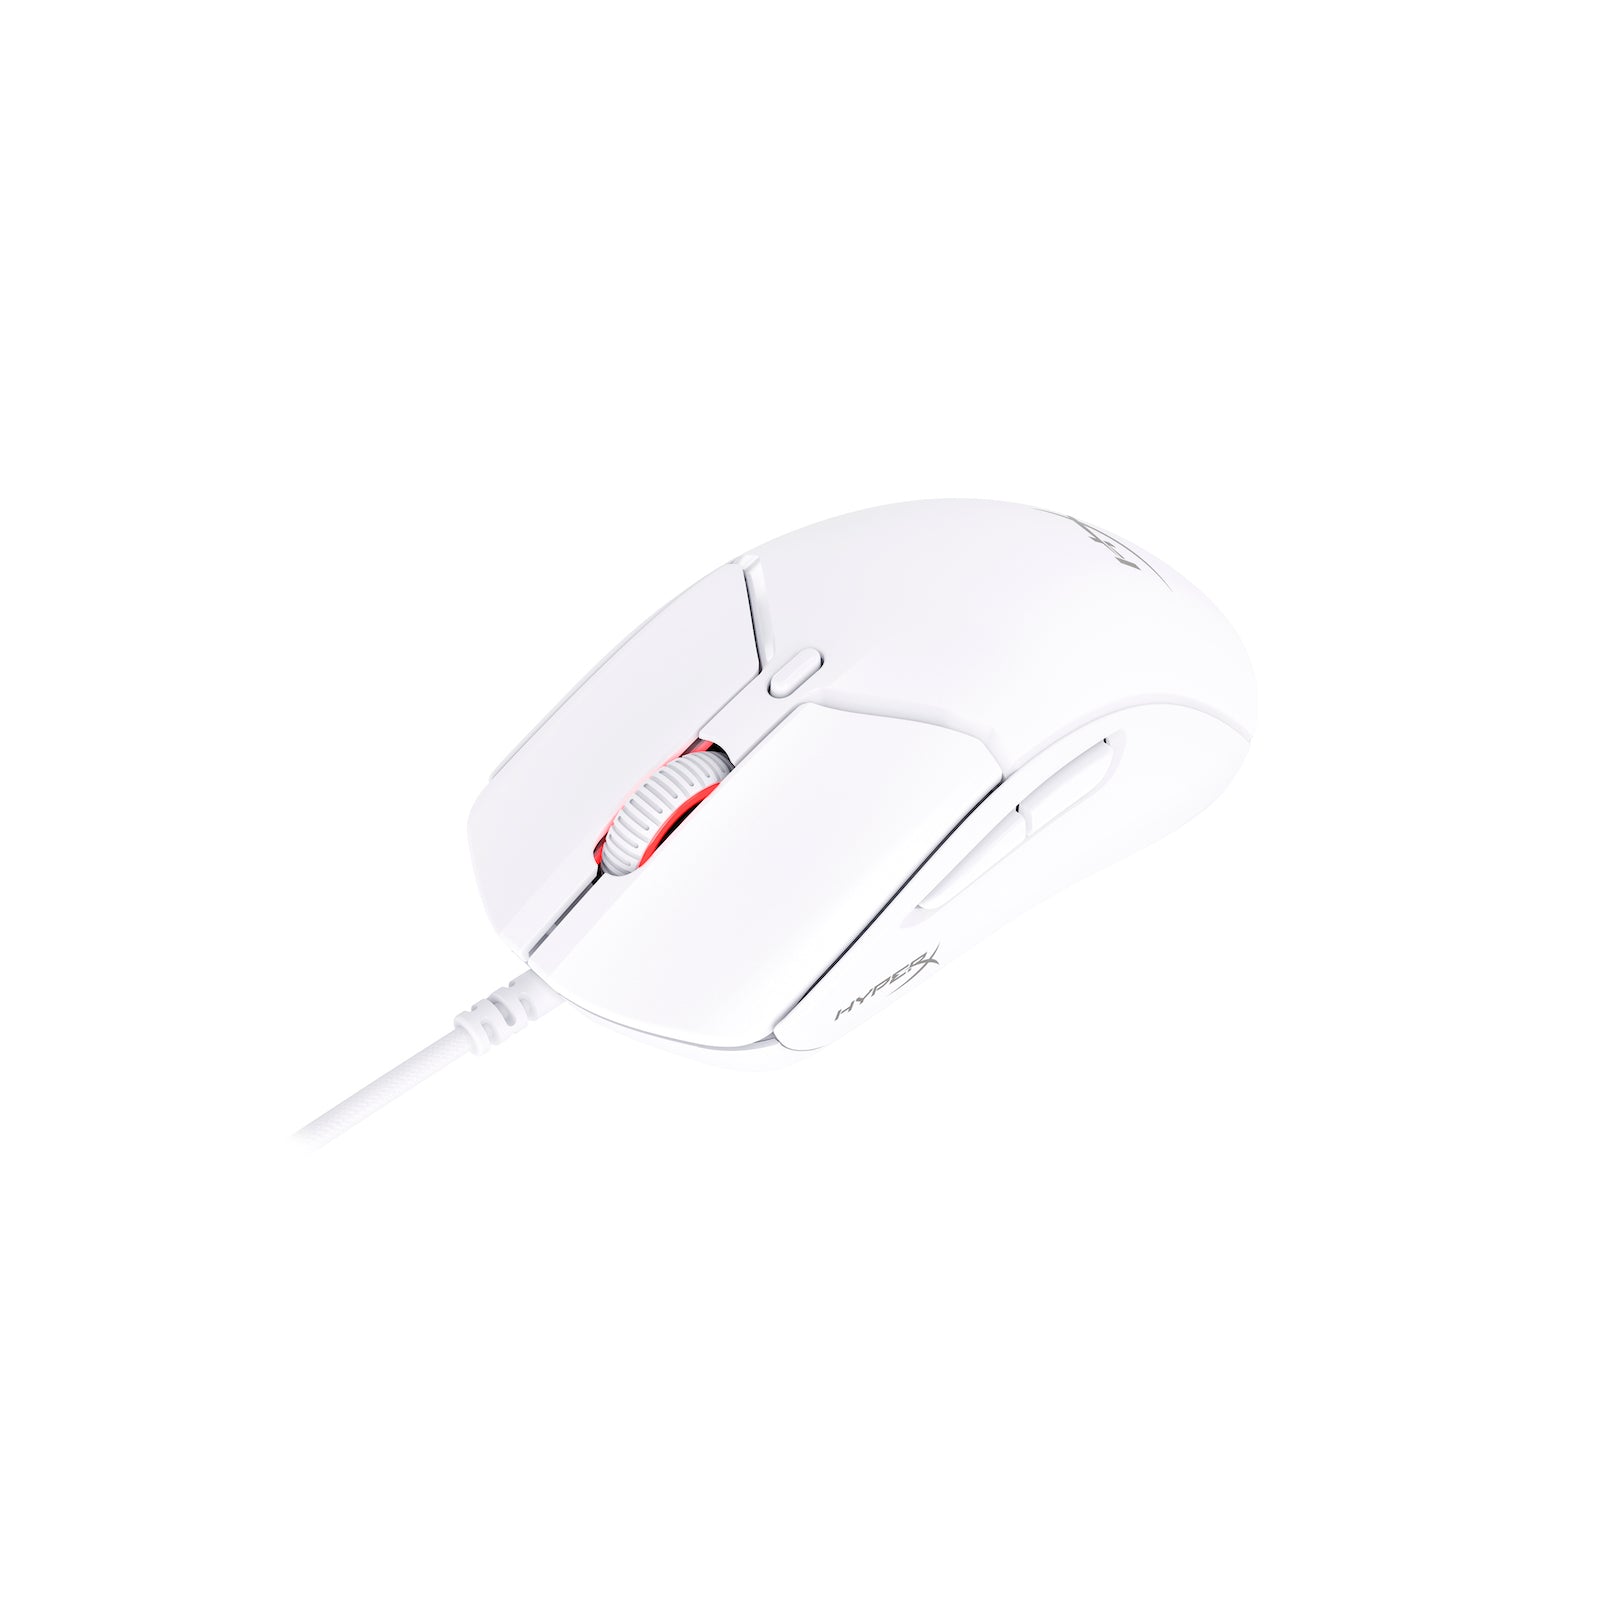 Haste 2 Gaming | Pulsefire HyperX Mouse